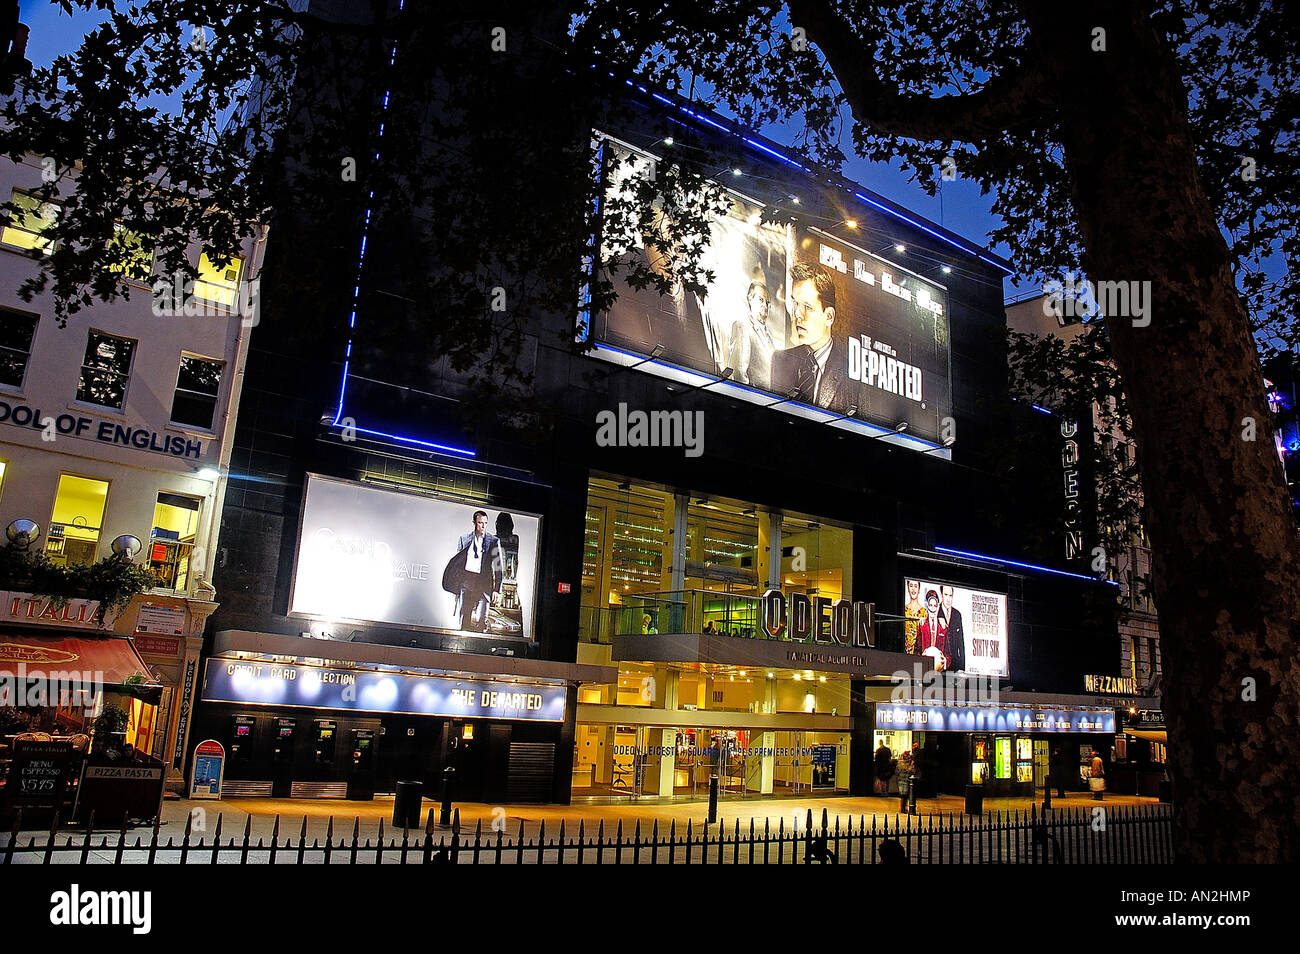 Leicester Square at Night Banque D'Images